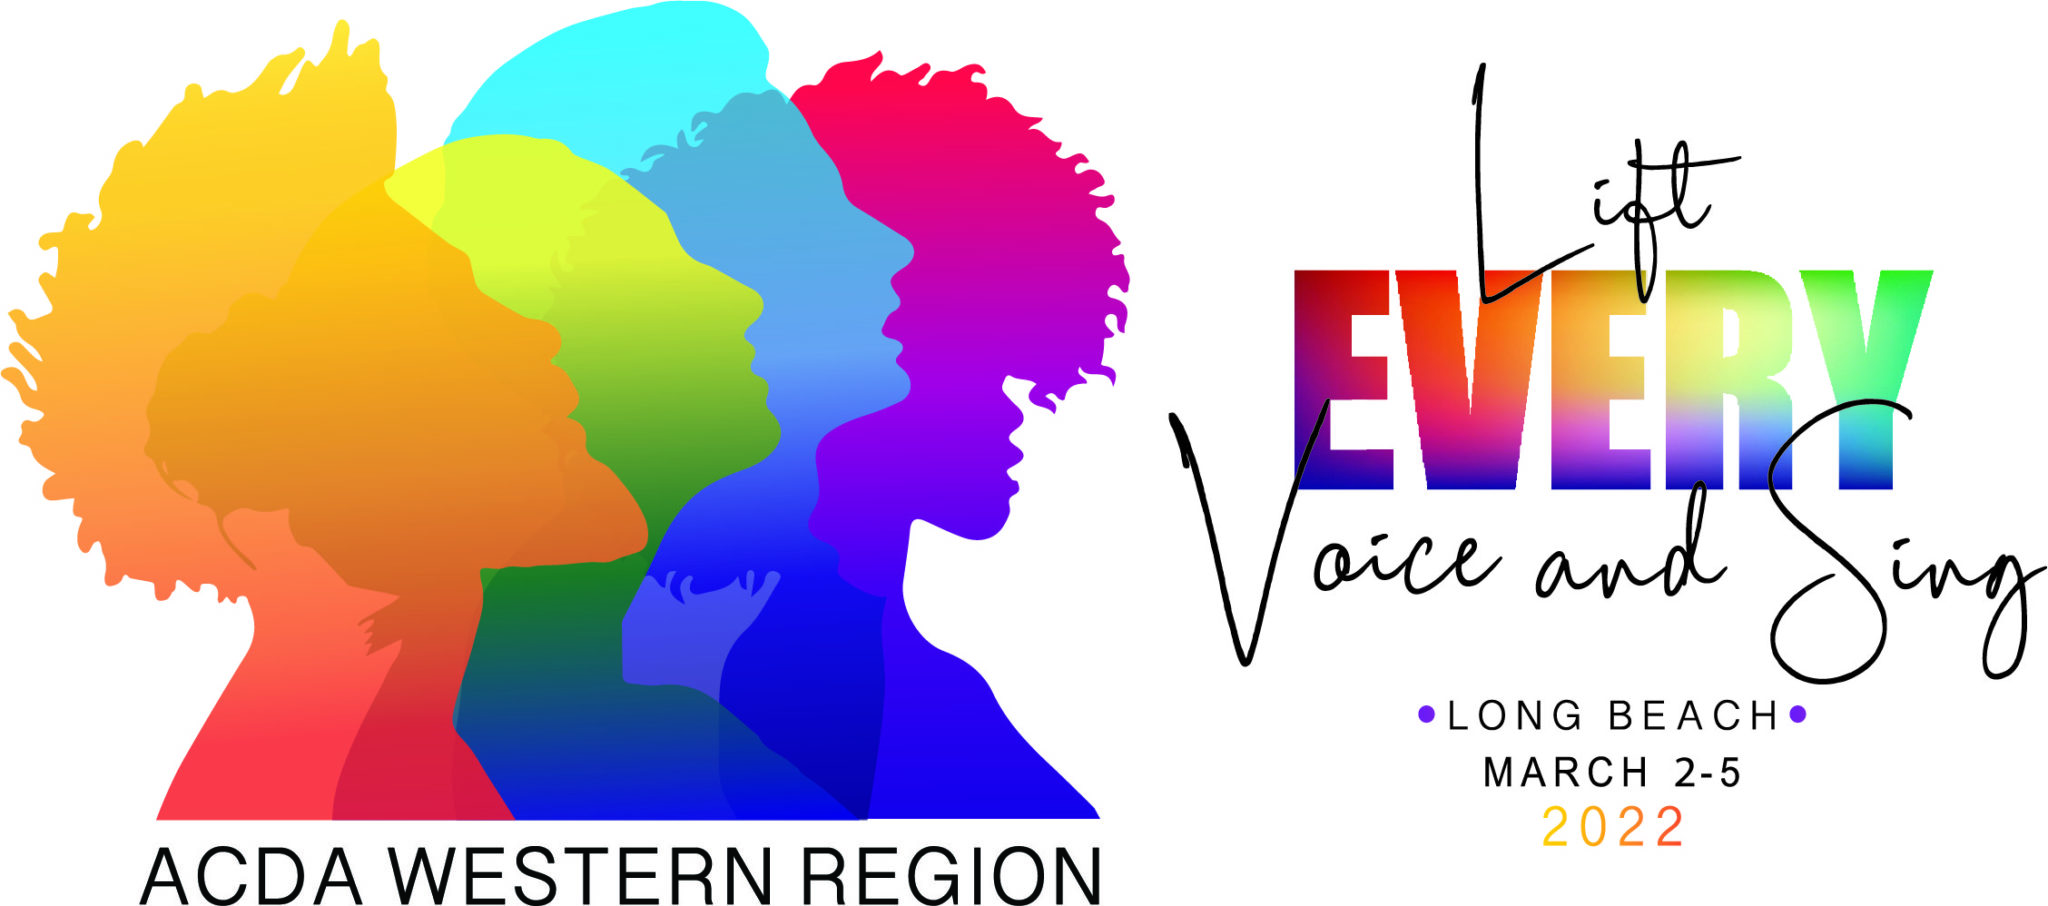 MAR 2-5 ACDA Lift Every Voice and Sing Logo 2022